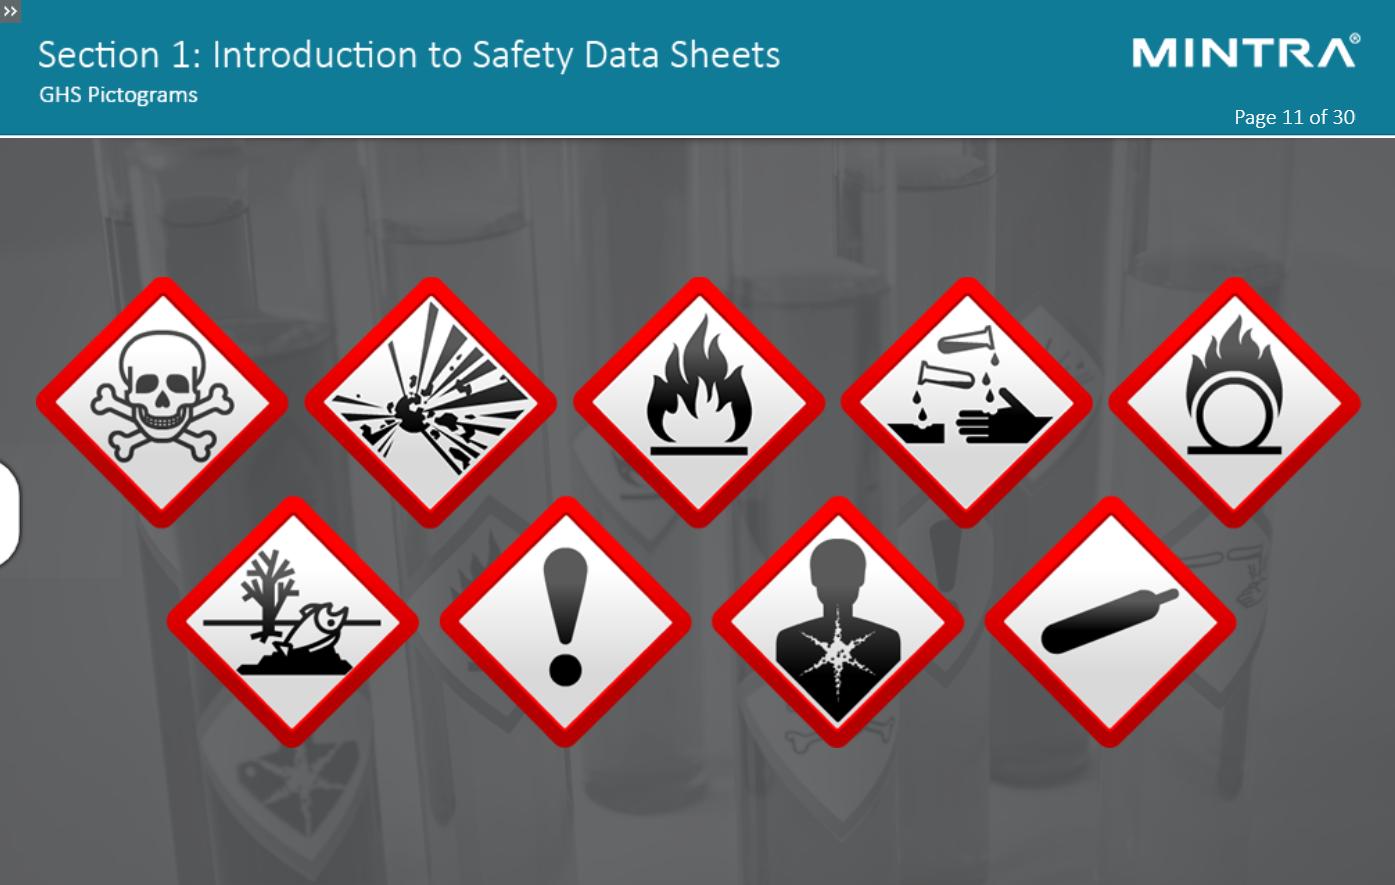 Introduction to Safety Data Sheets Training